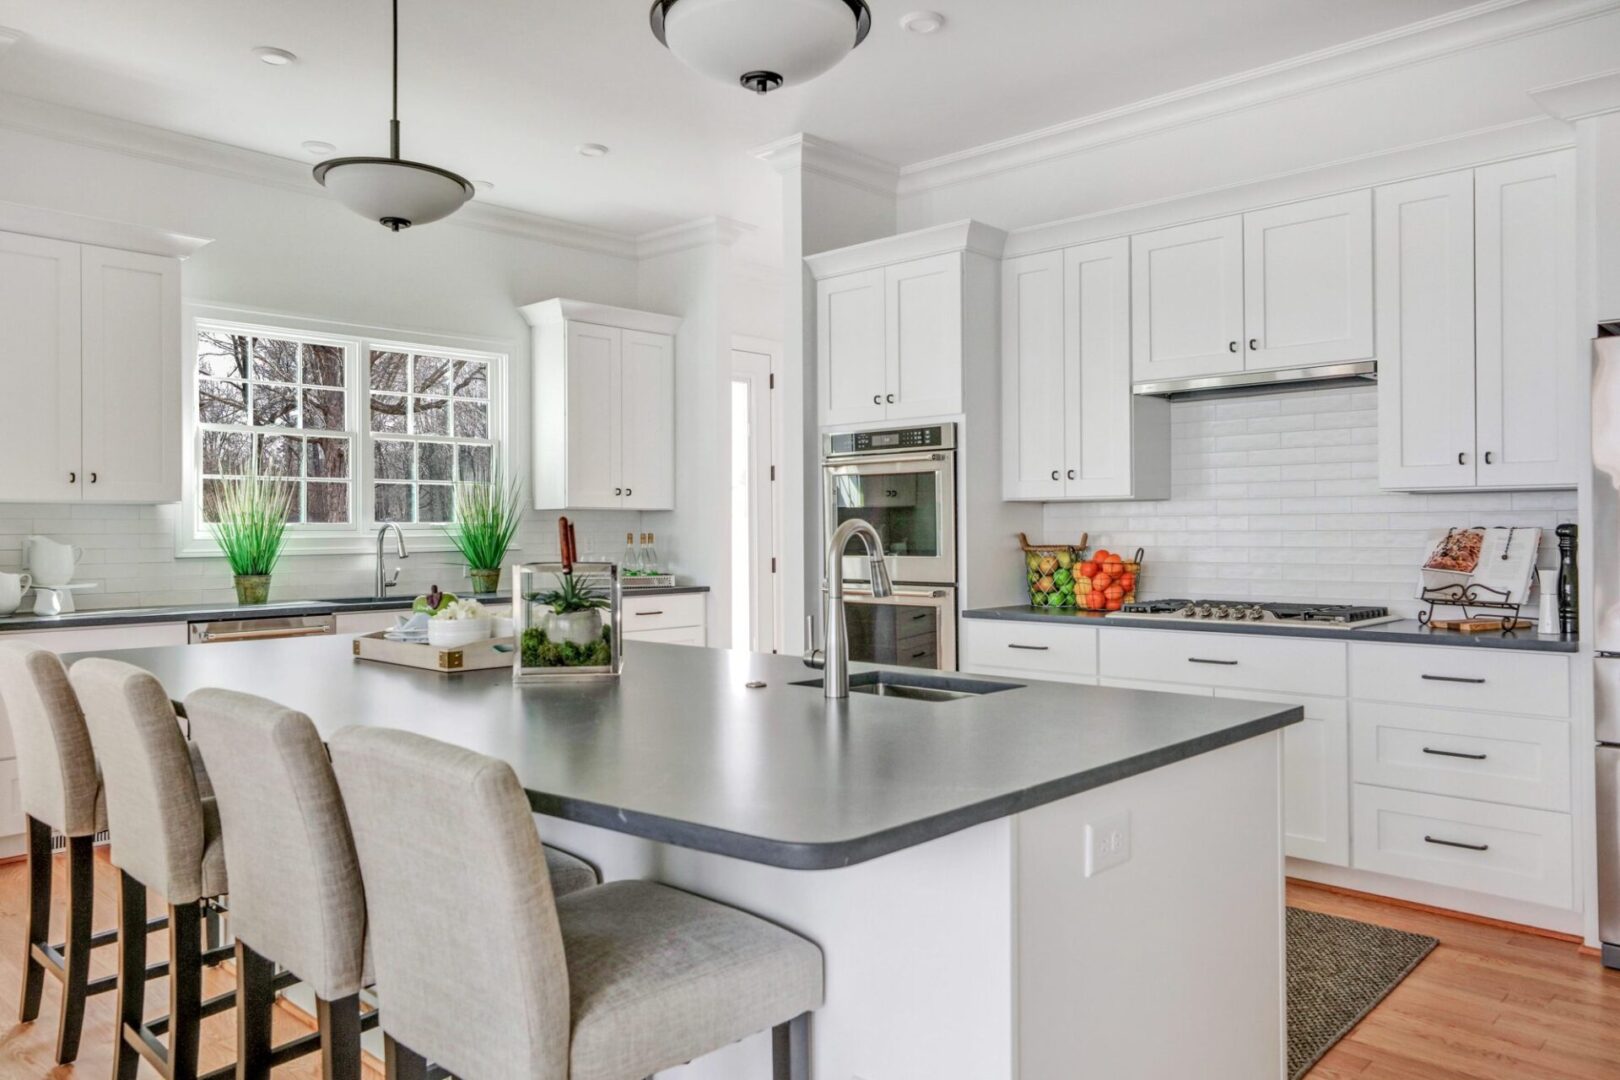 A kitchen with white cabinets and gray countertops.